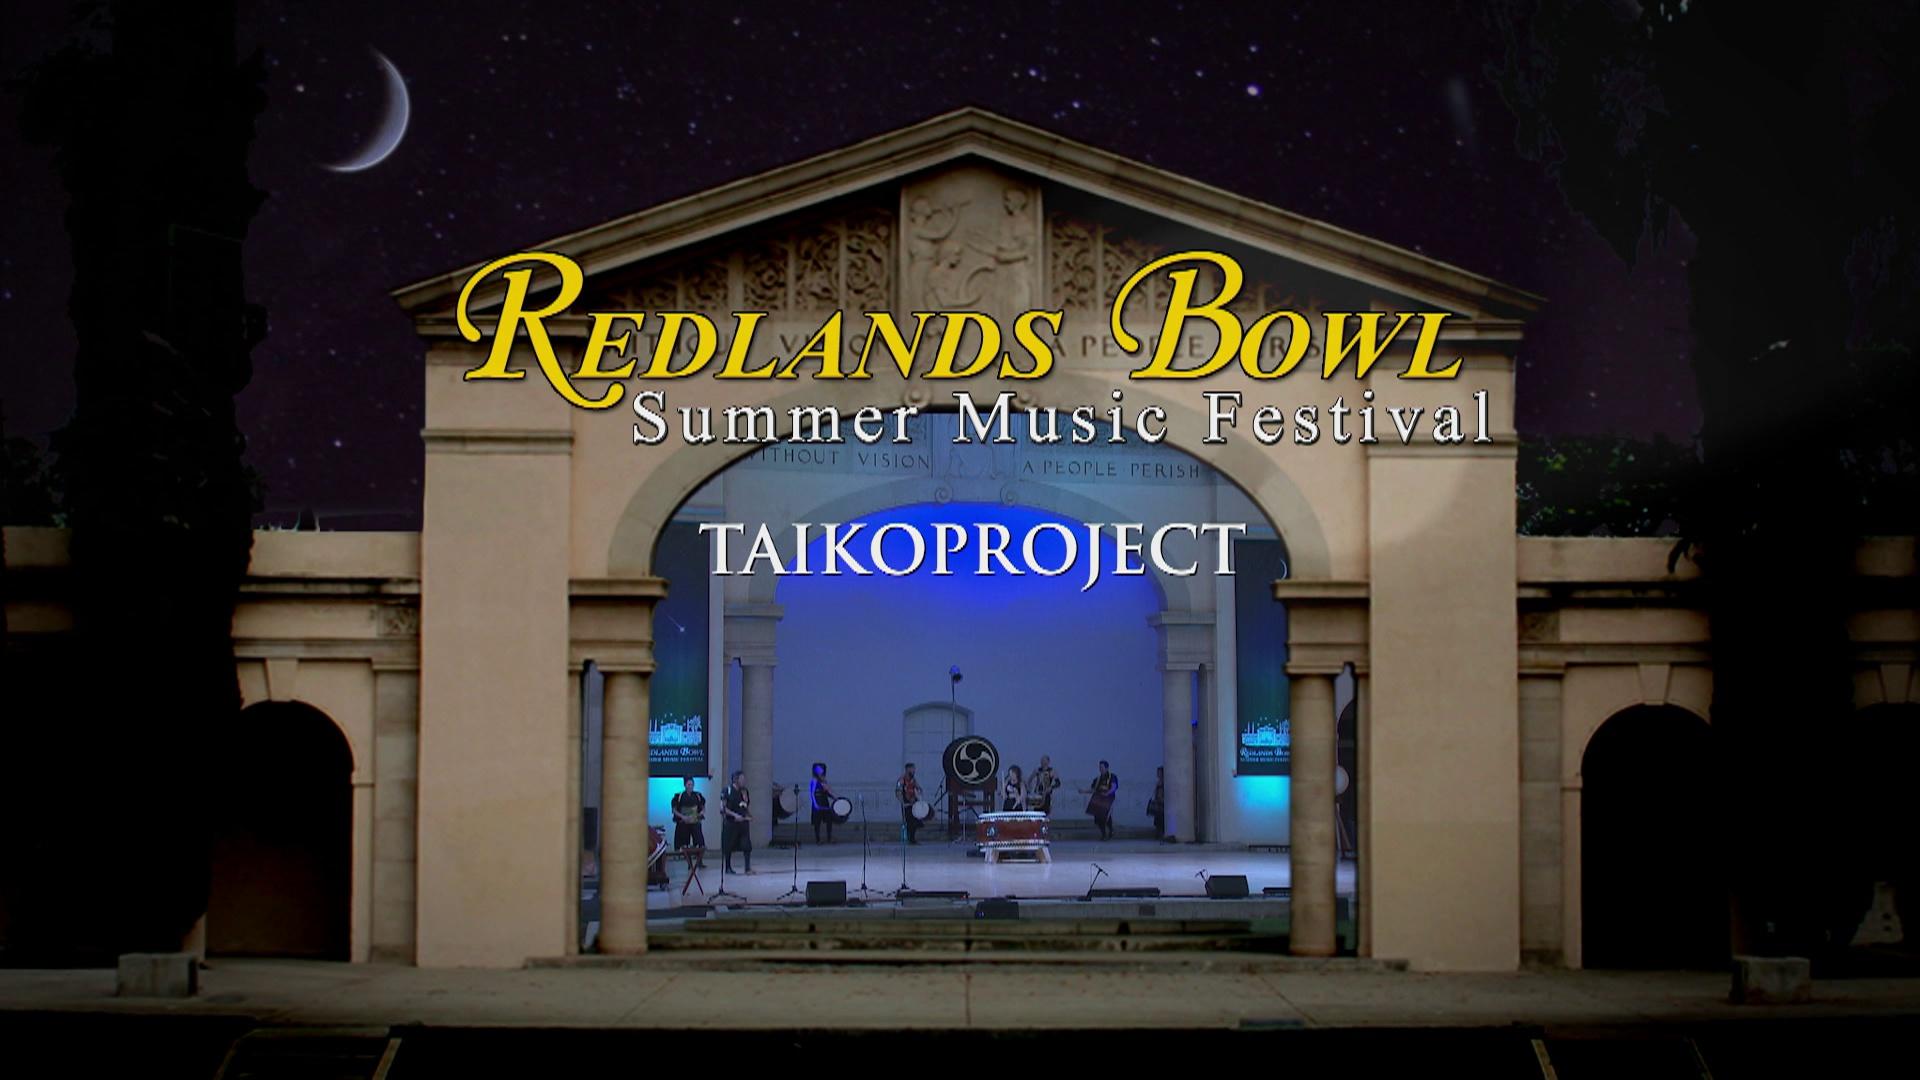 Taikoproject Redlands Bowl Summer Music Festival ALL ARTS